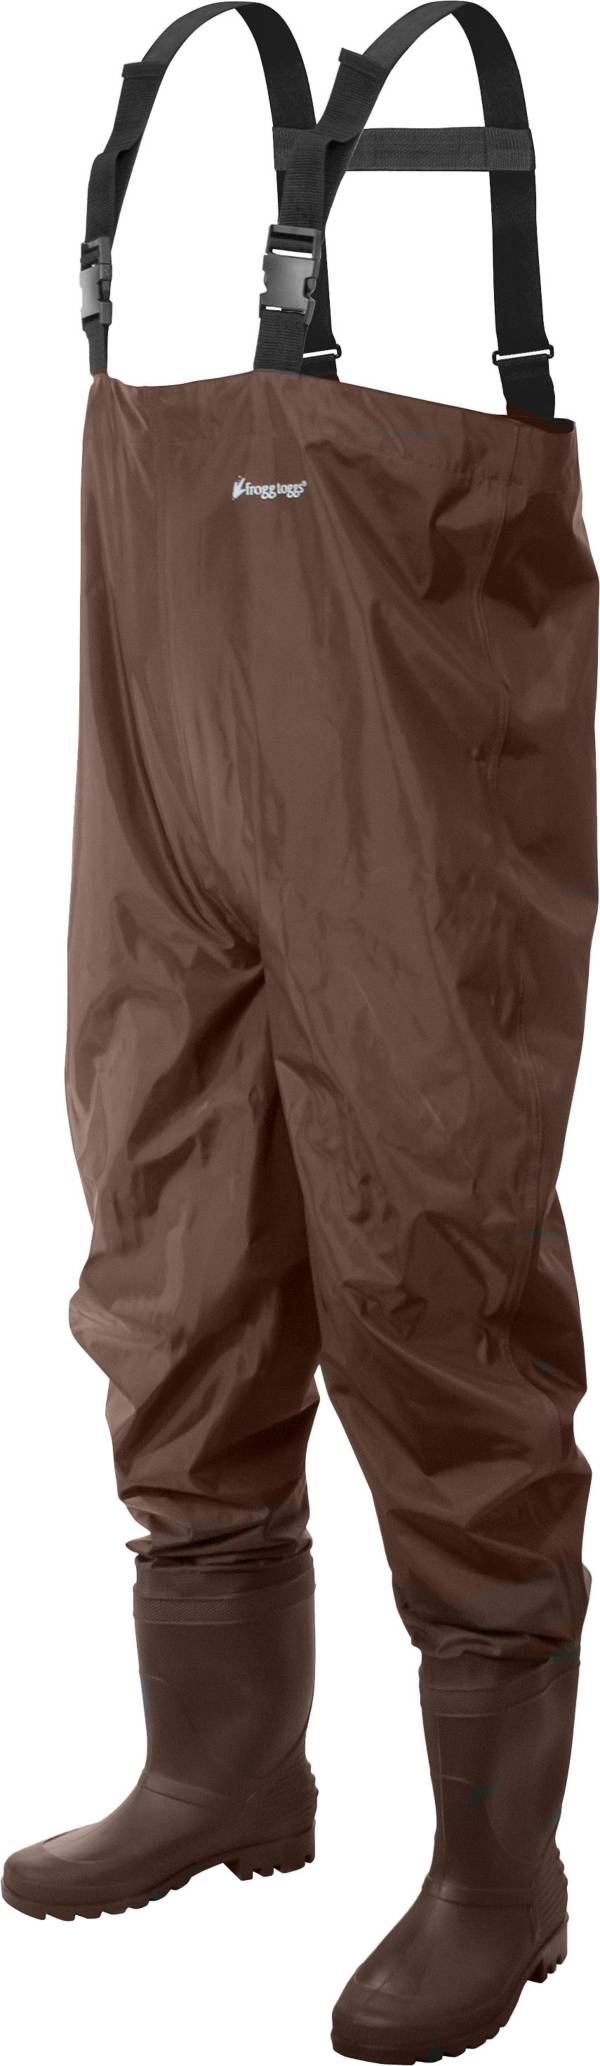 frogg toggs Men's Rana II PVC Lug Chest Wader product image